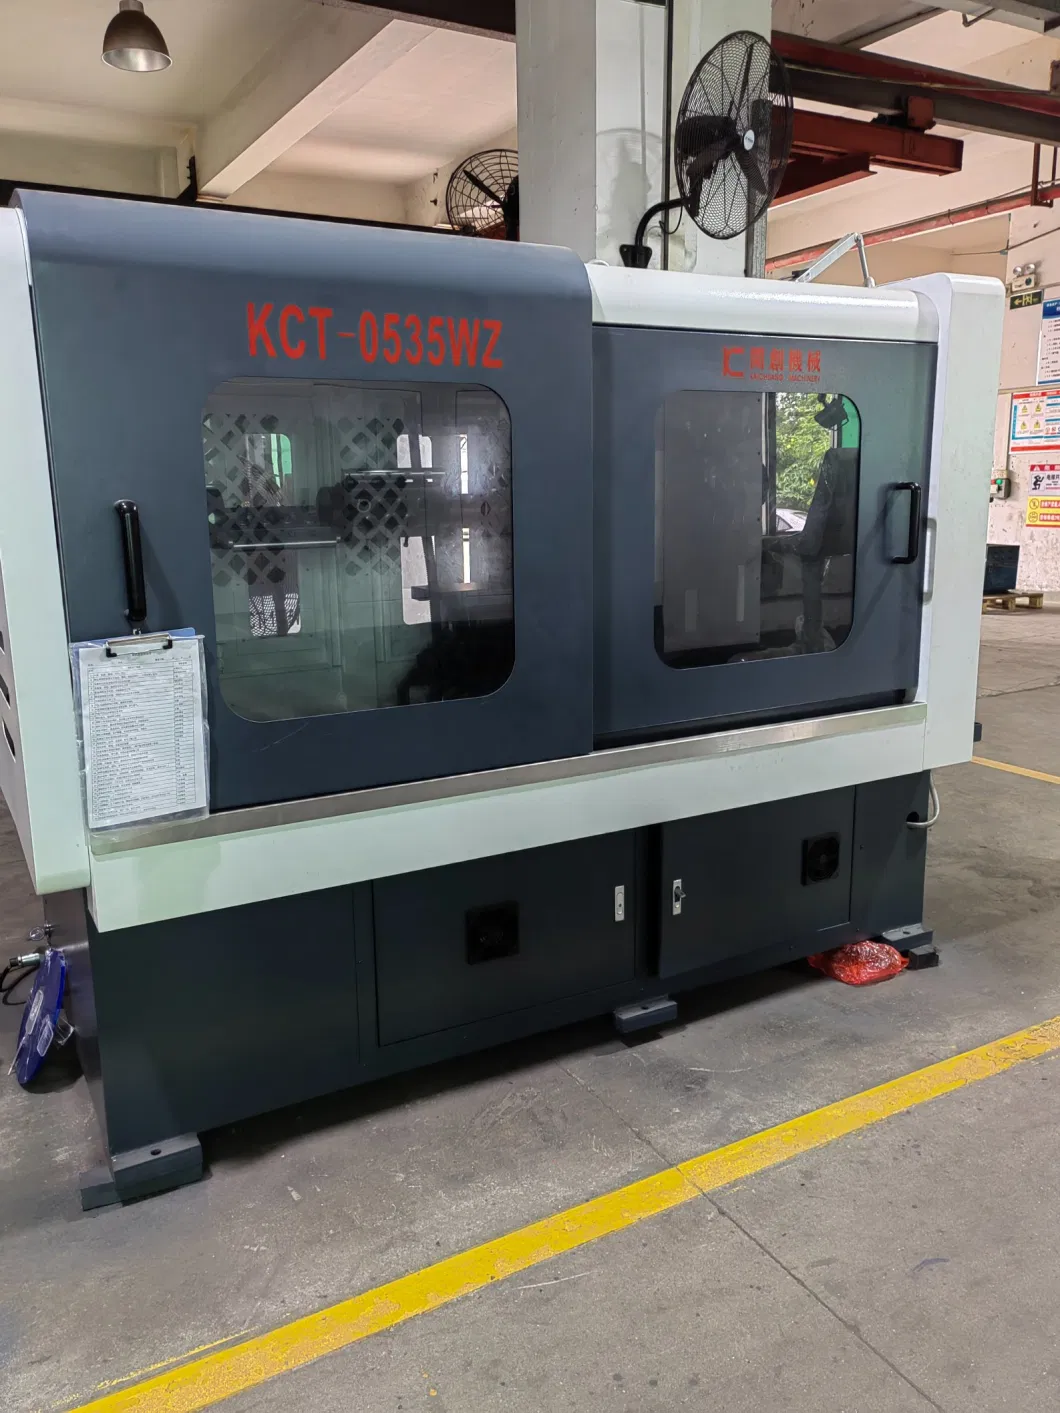 Monthly Deals KCMCO 5 Axis 4.0mm CNC Wire Forming Machine for SpIRal Spring Making Machine KCT-0535WZ